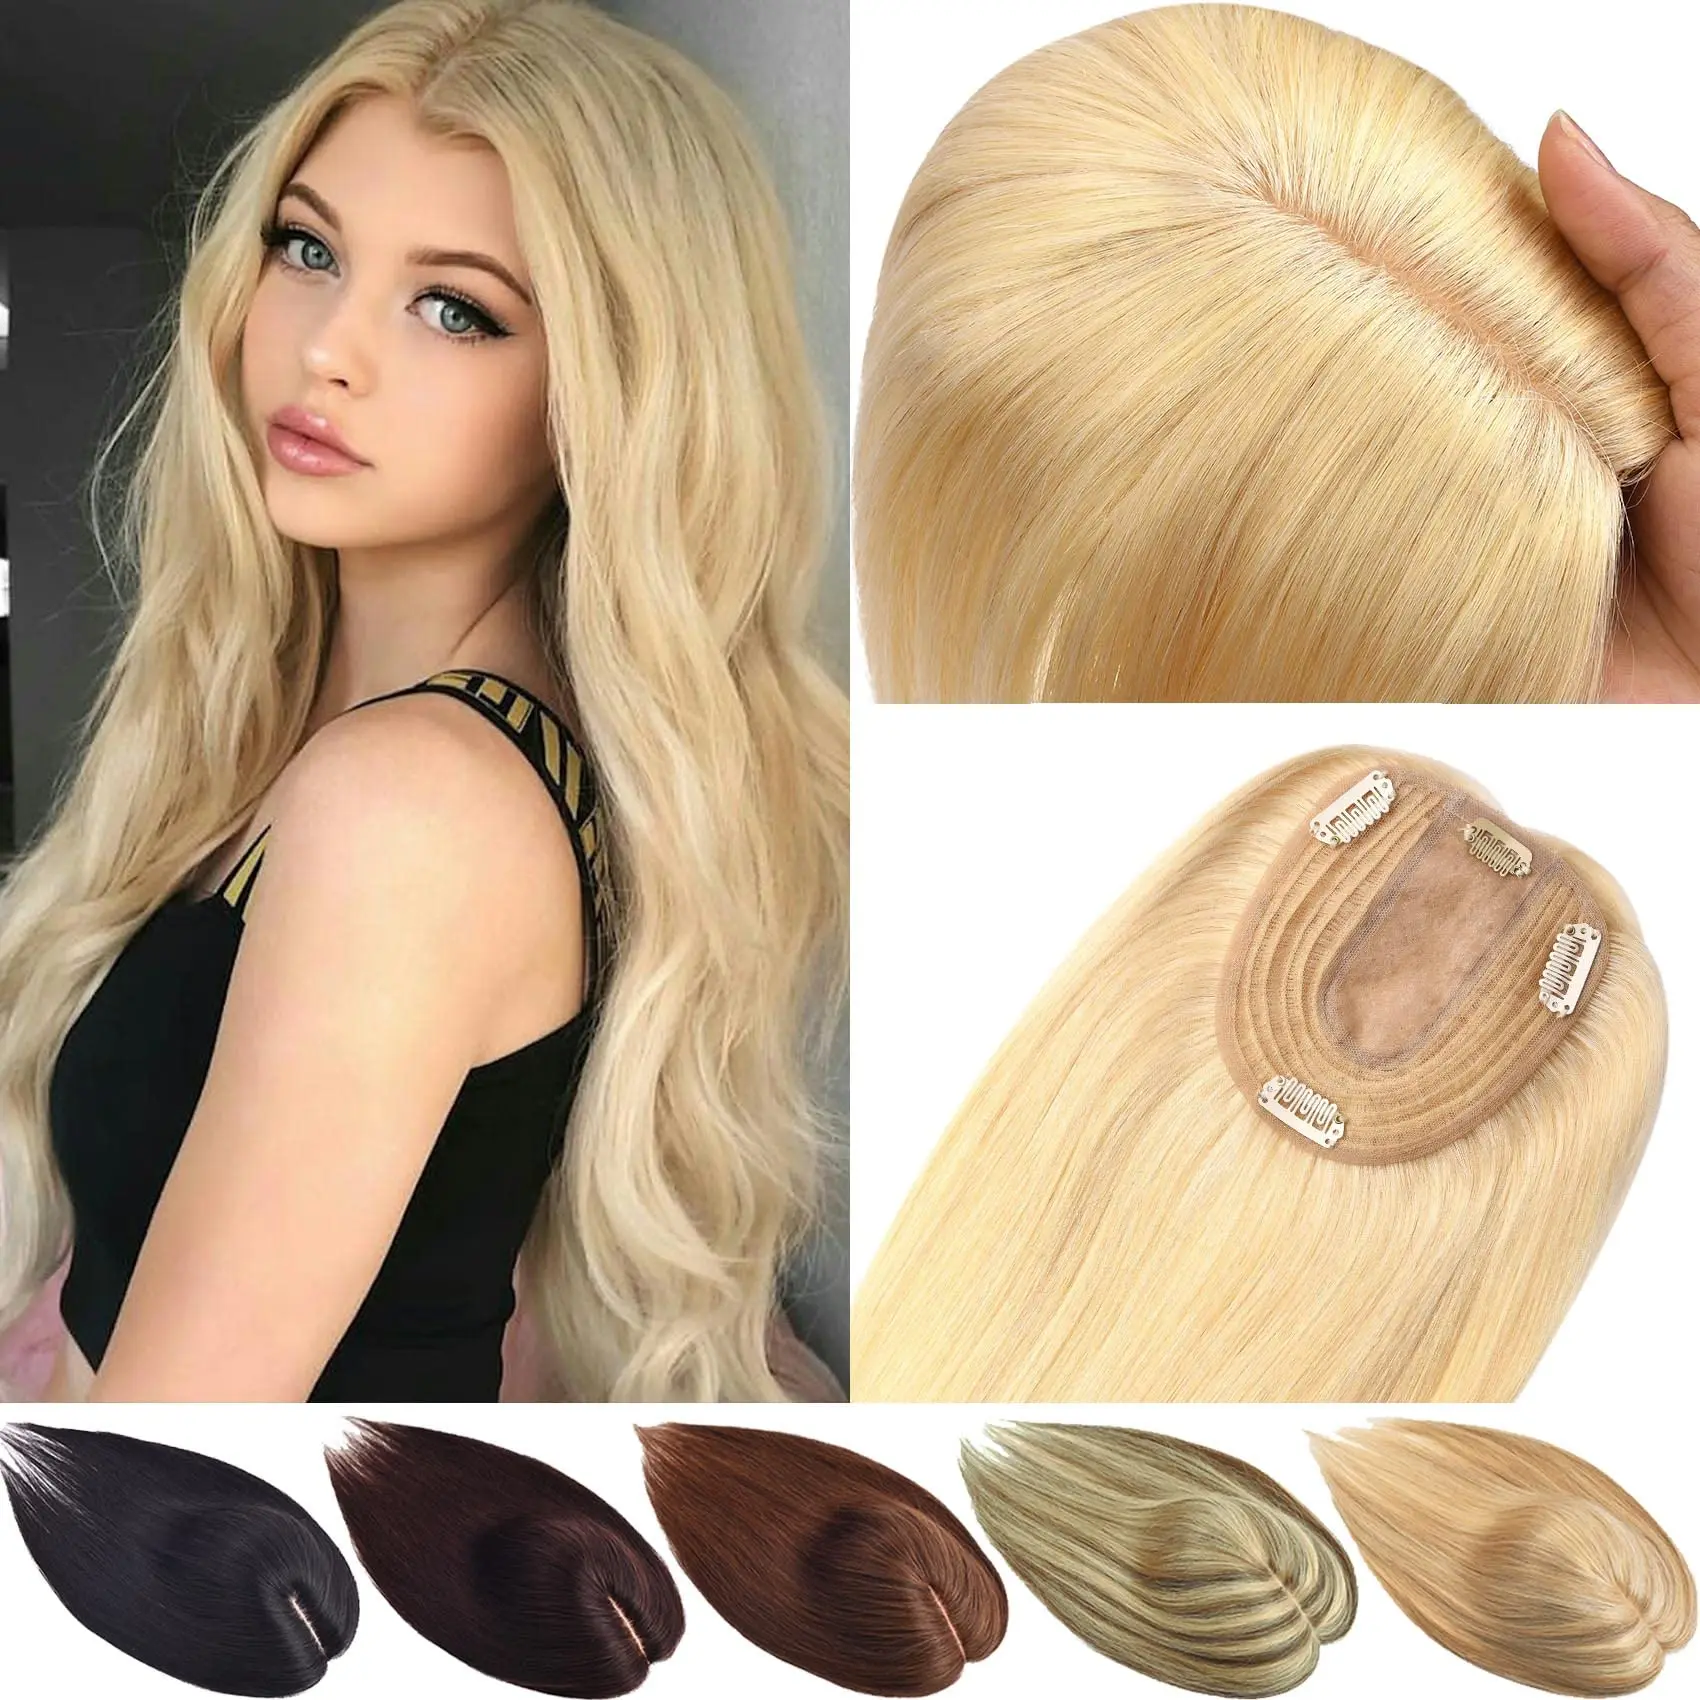 

Real Human Hair Wigs Hair Toppers for Women Clip In Women Toupee Silk Base Hairpiece with Bangs Blonde Clips In Hair Extensions